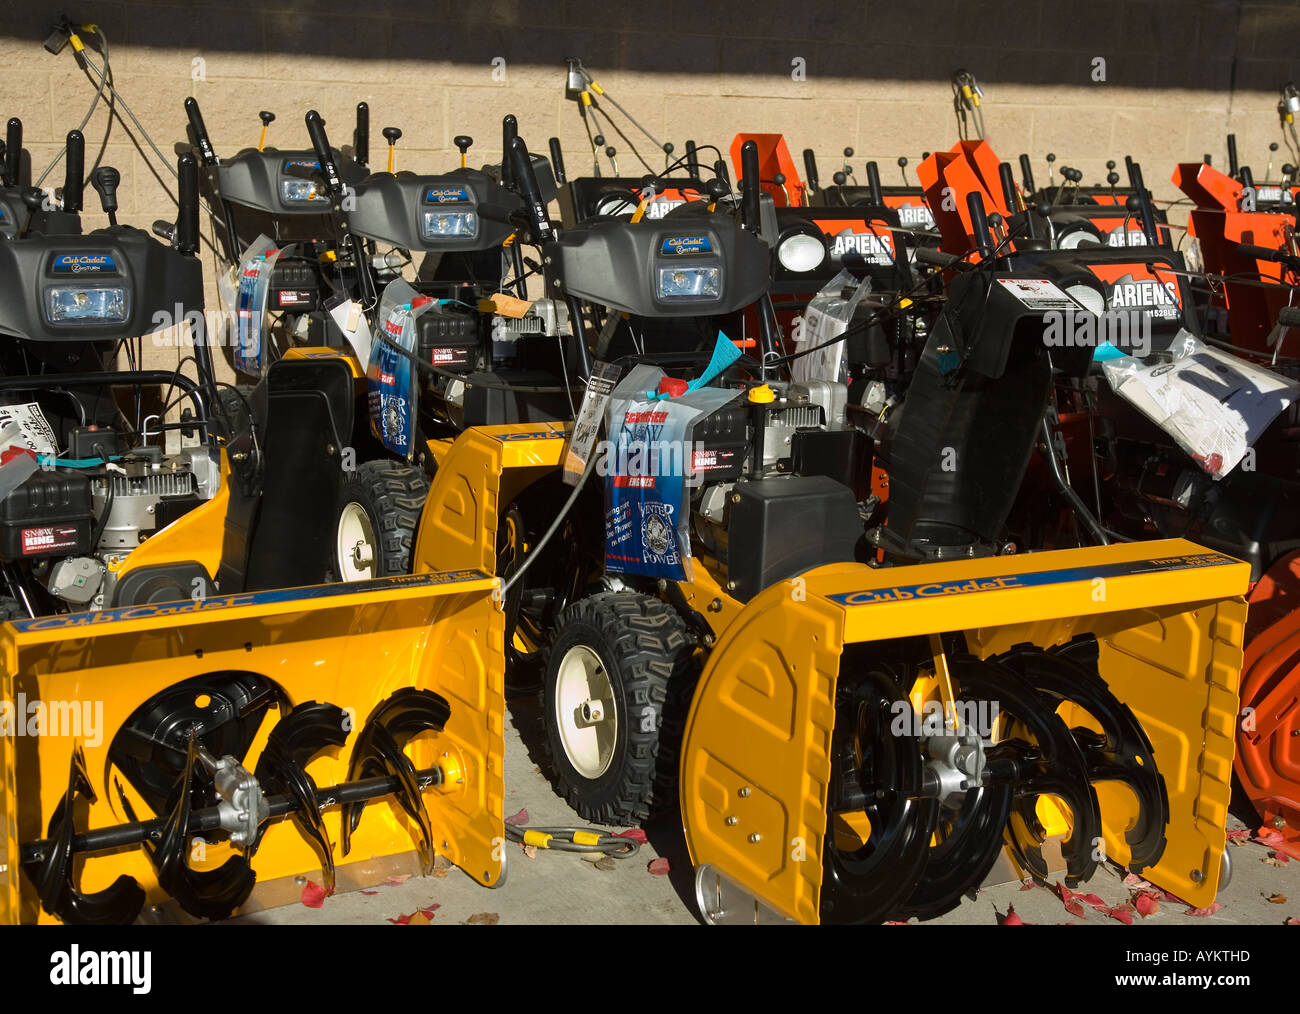 Snow plows for sale at a home center Stock Photo